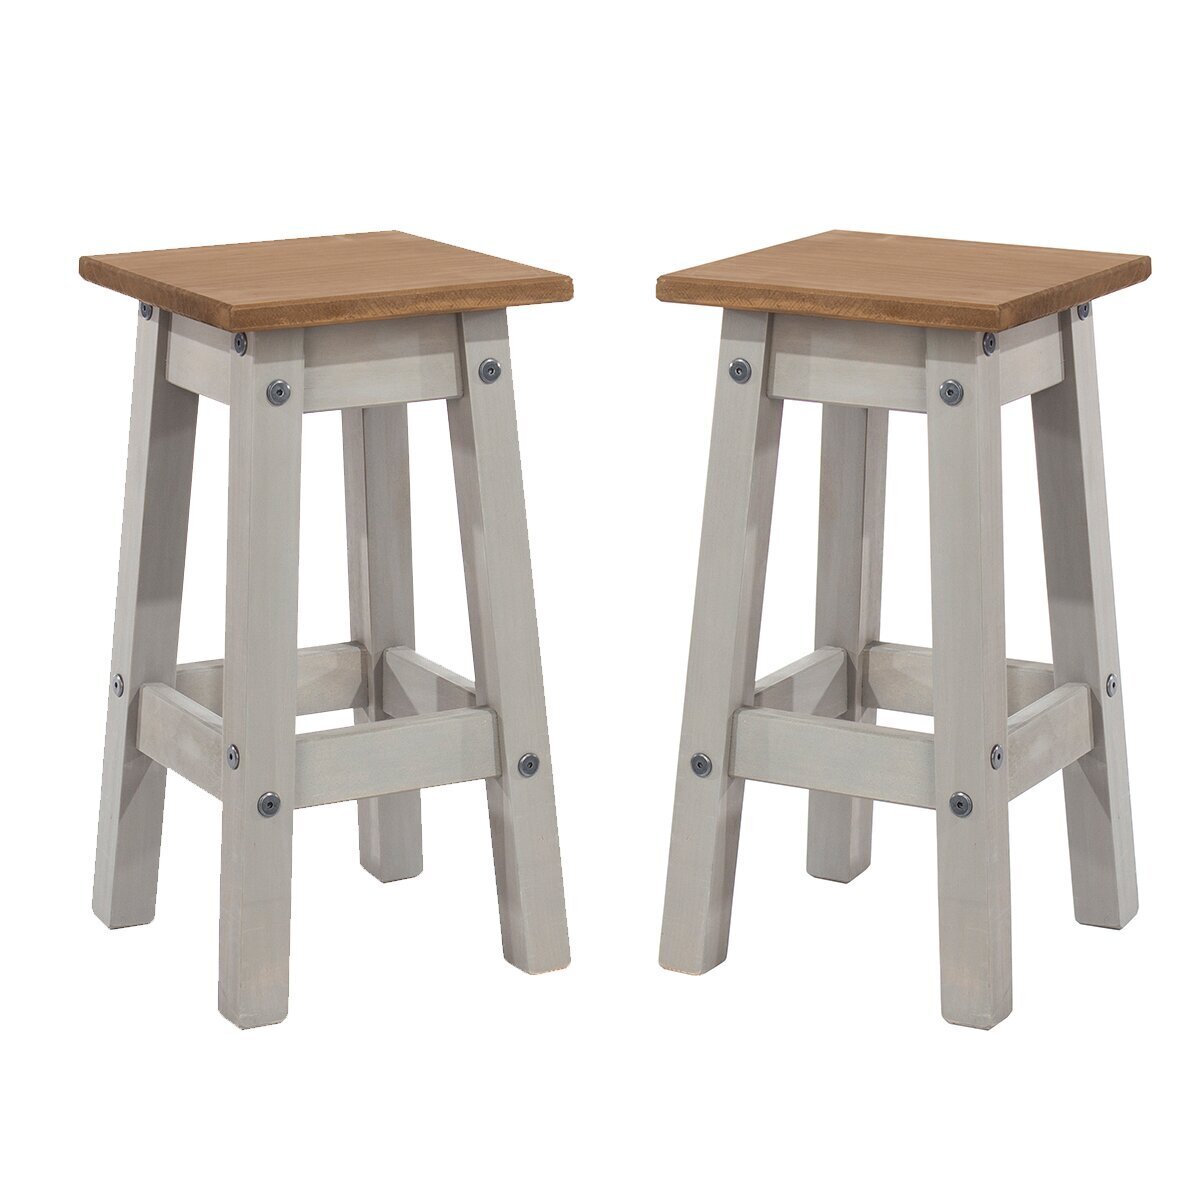 Cottage Style Stackable Wood Stools